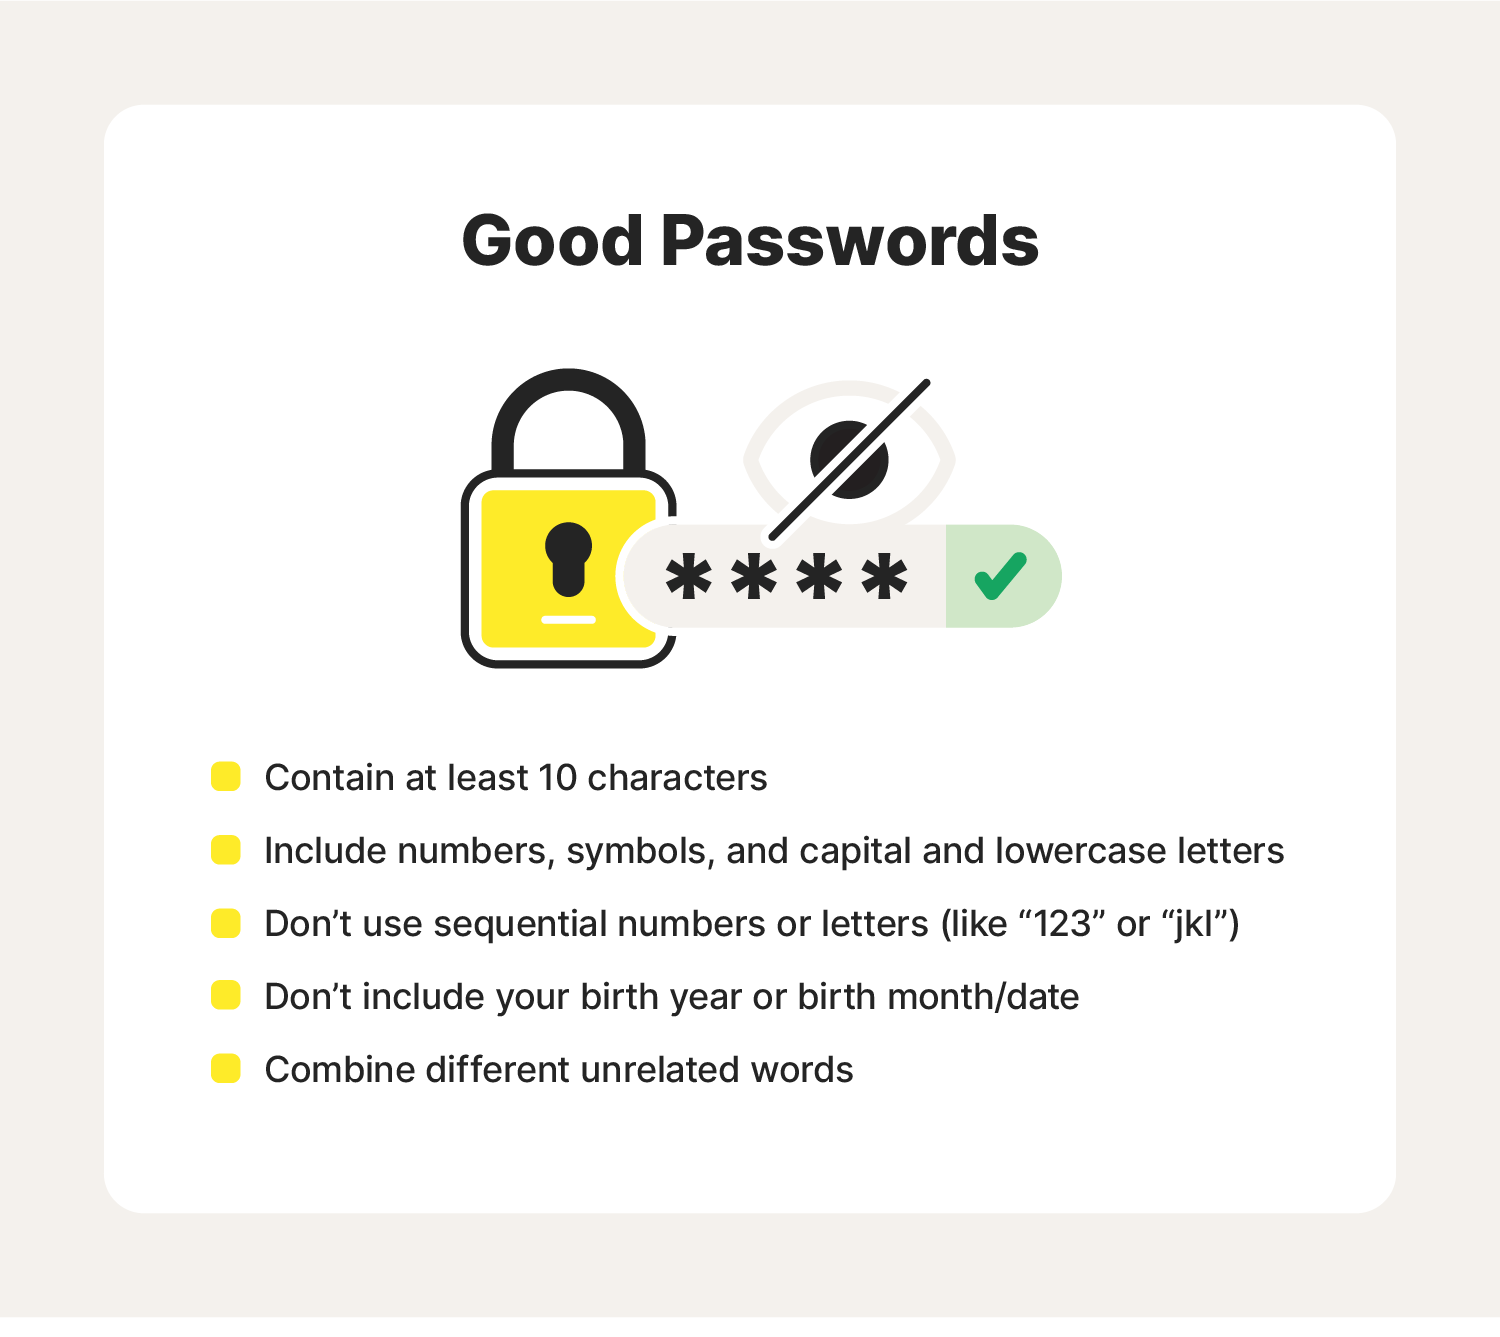 A graphic showing characteristics of good passwords.